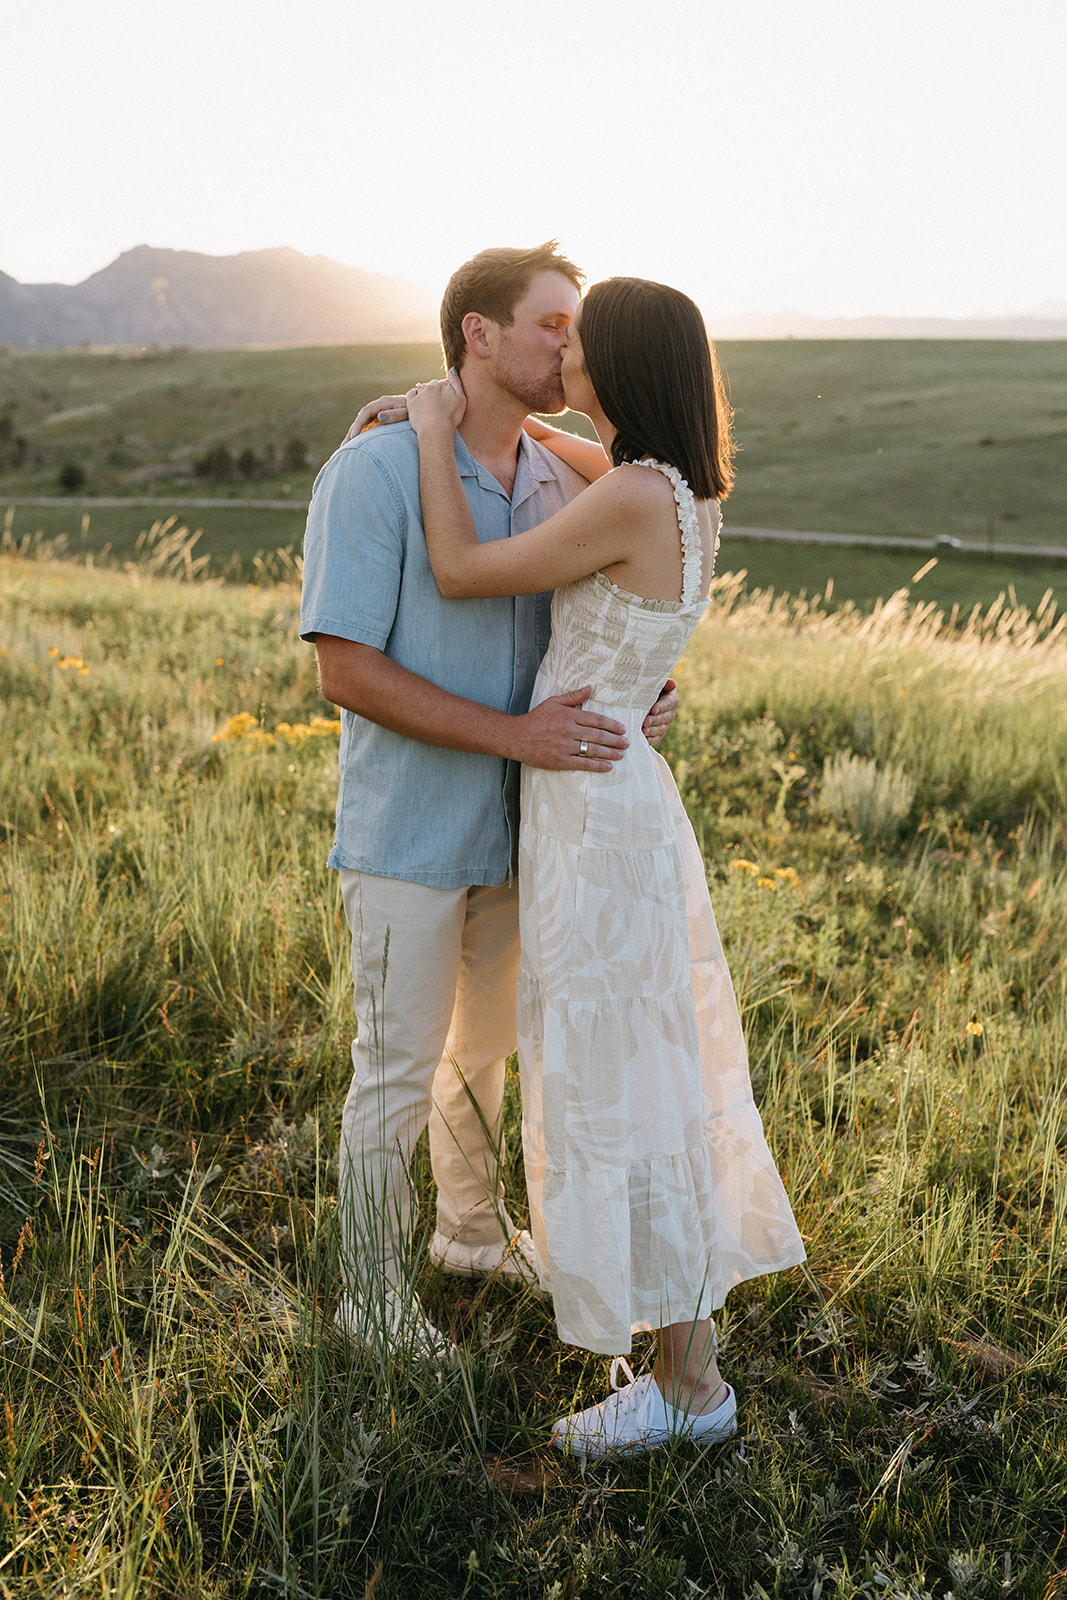 An editorial engagement couple kiss and embrace at Sunset in a wildflower meadow near The Flatirons in Boulder, Colorado